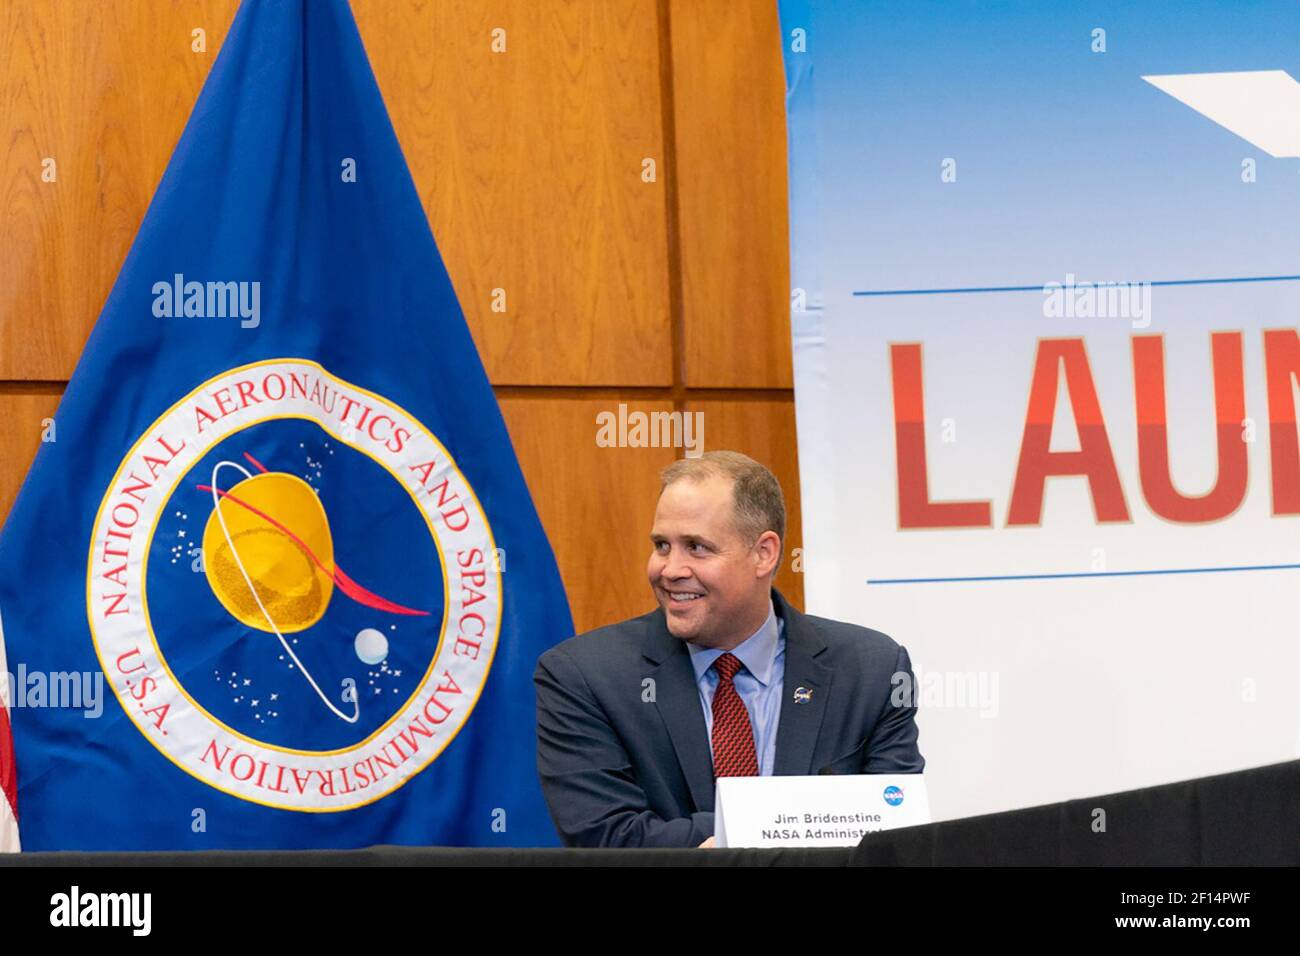 NASA Administrator Jim Bridenstine joins President Donald Trump at a launch briefing in preparation for the launch of the SpaceX Falcon 9 rocket with the Crew Dragon vehicle Wednesday May 27 2020 at the Kennedy Space Center in Cape Canaveral Fla. Stock Photo